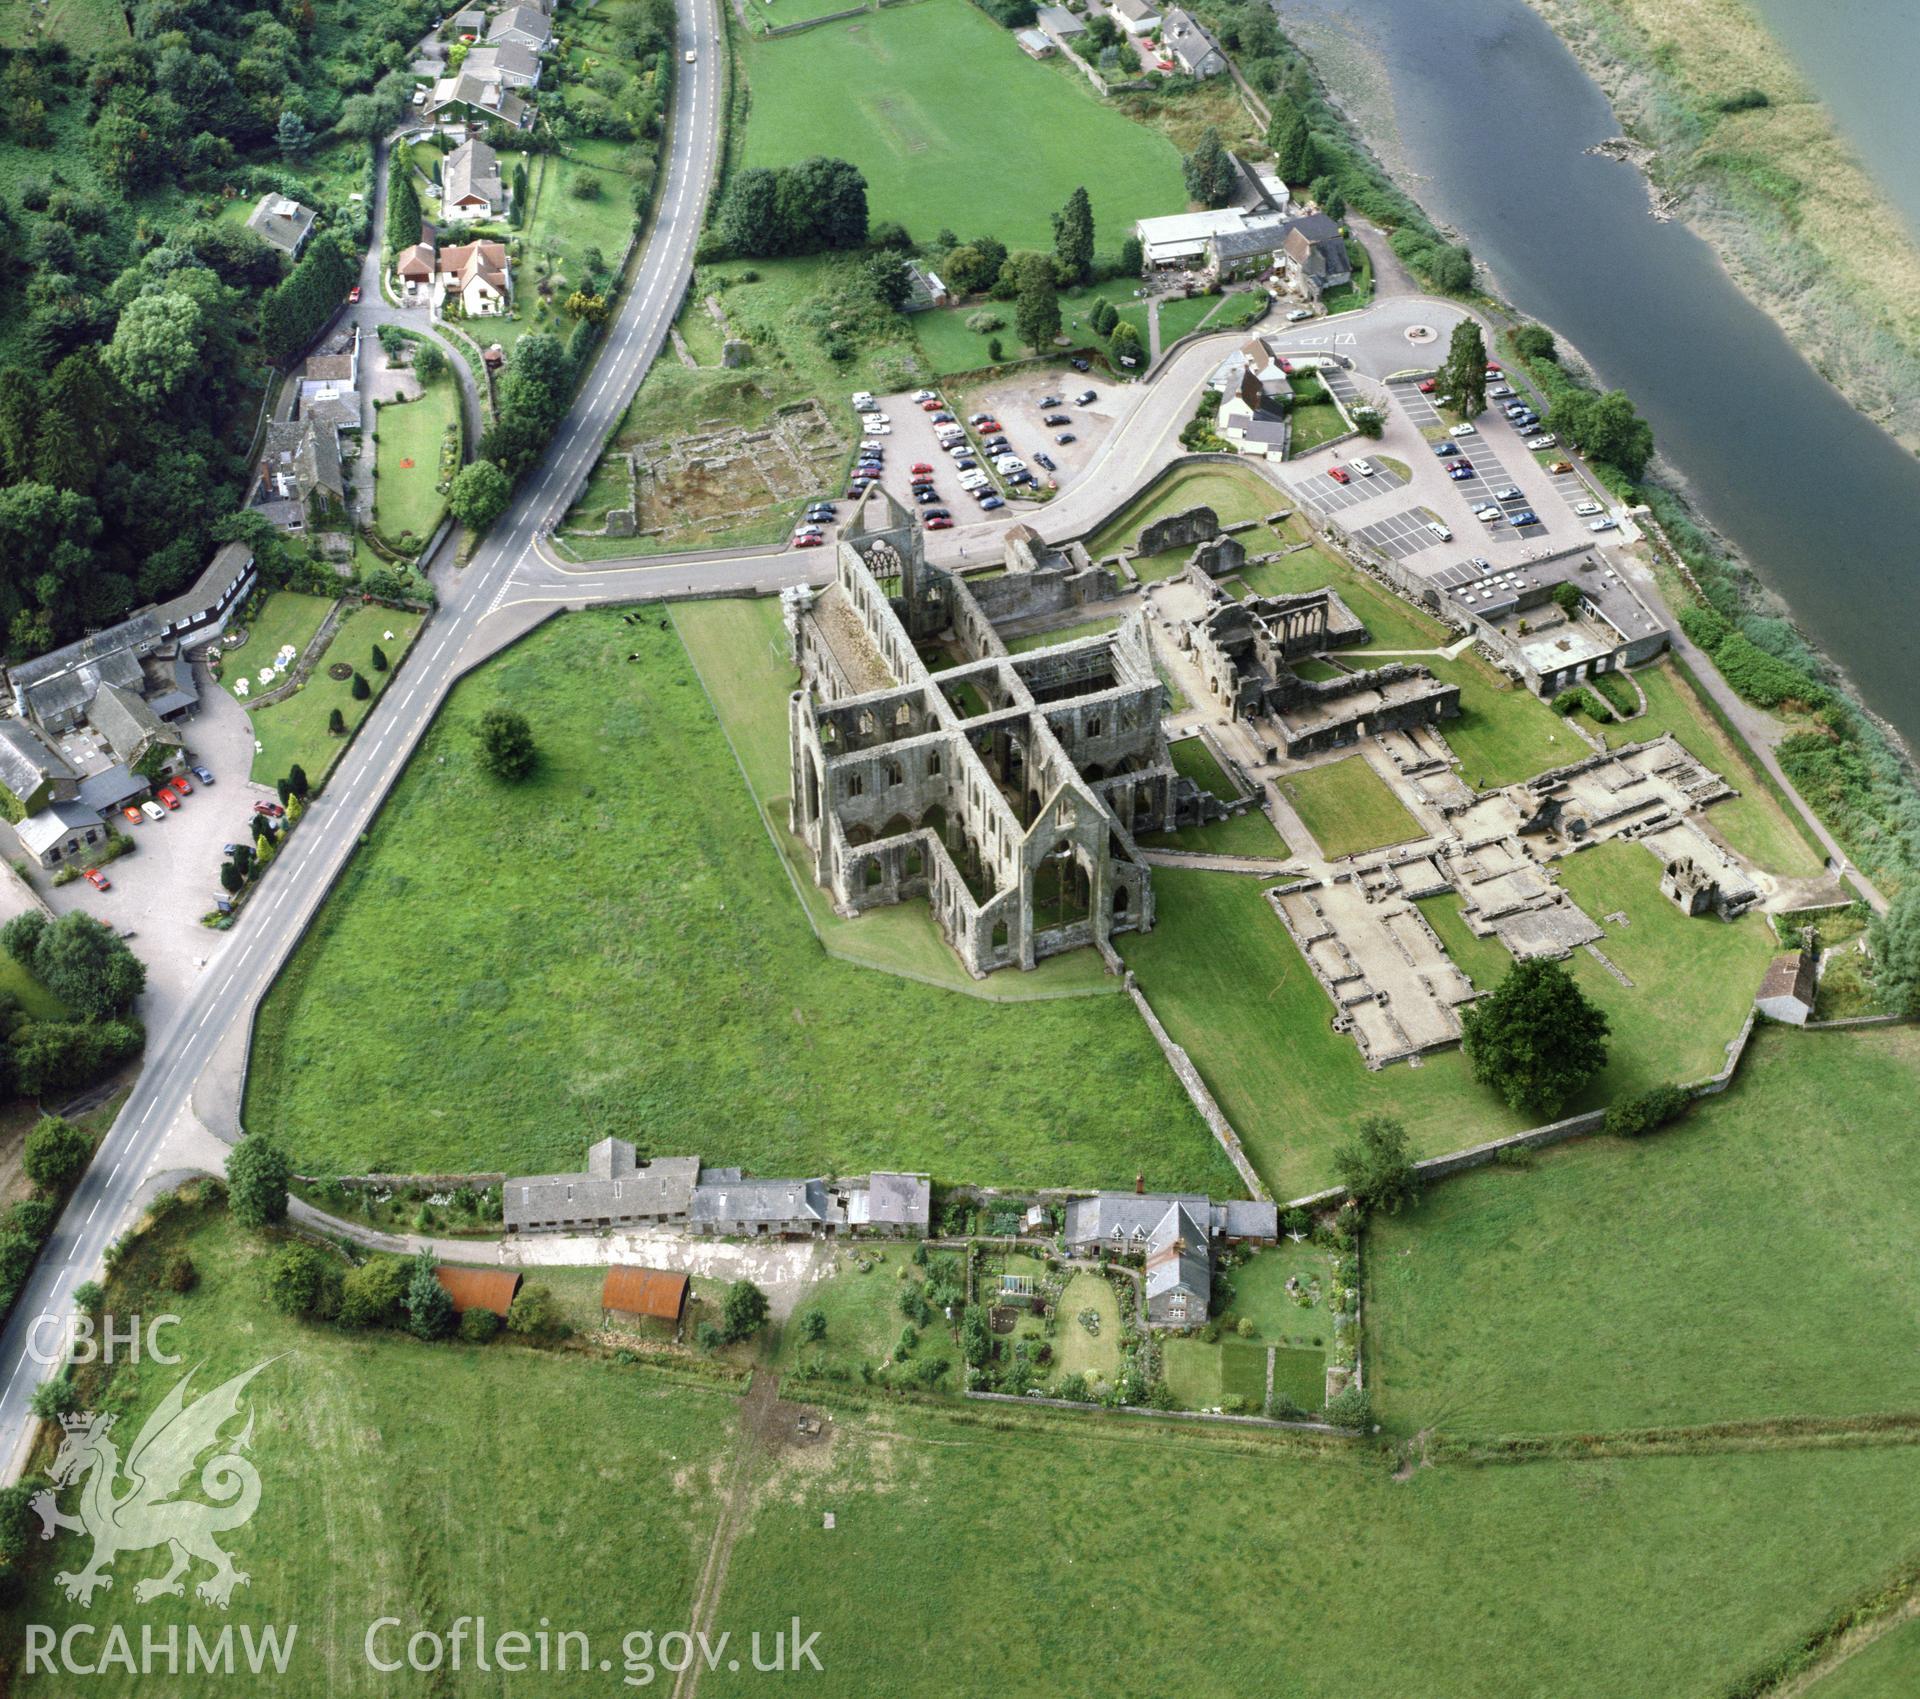 RCAHMW colour oblique aerial photograph of Tintern Abbey, taken by C.R. Musson, 05/08/94